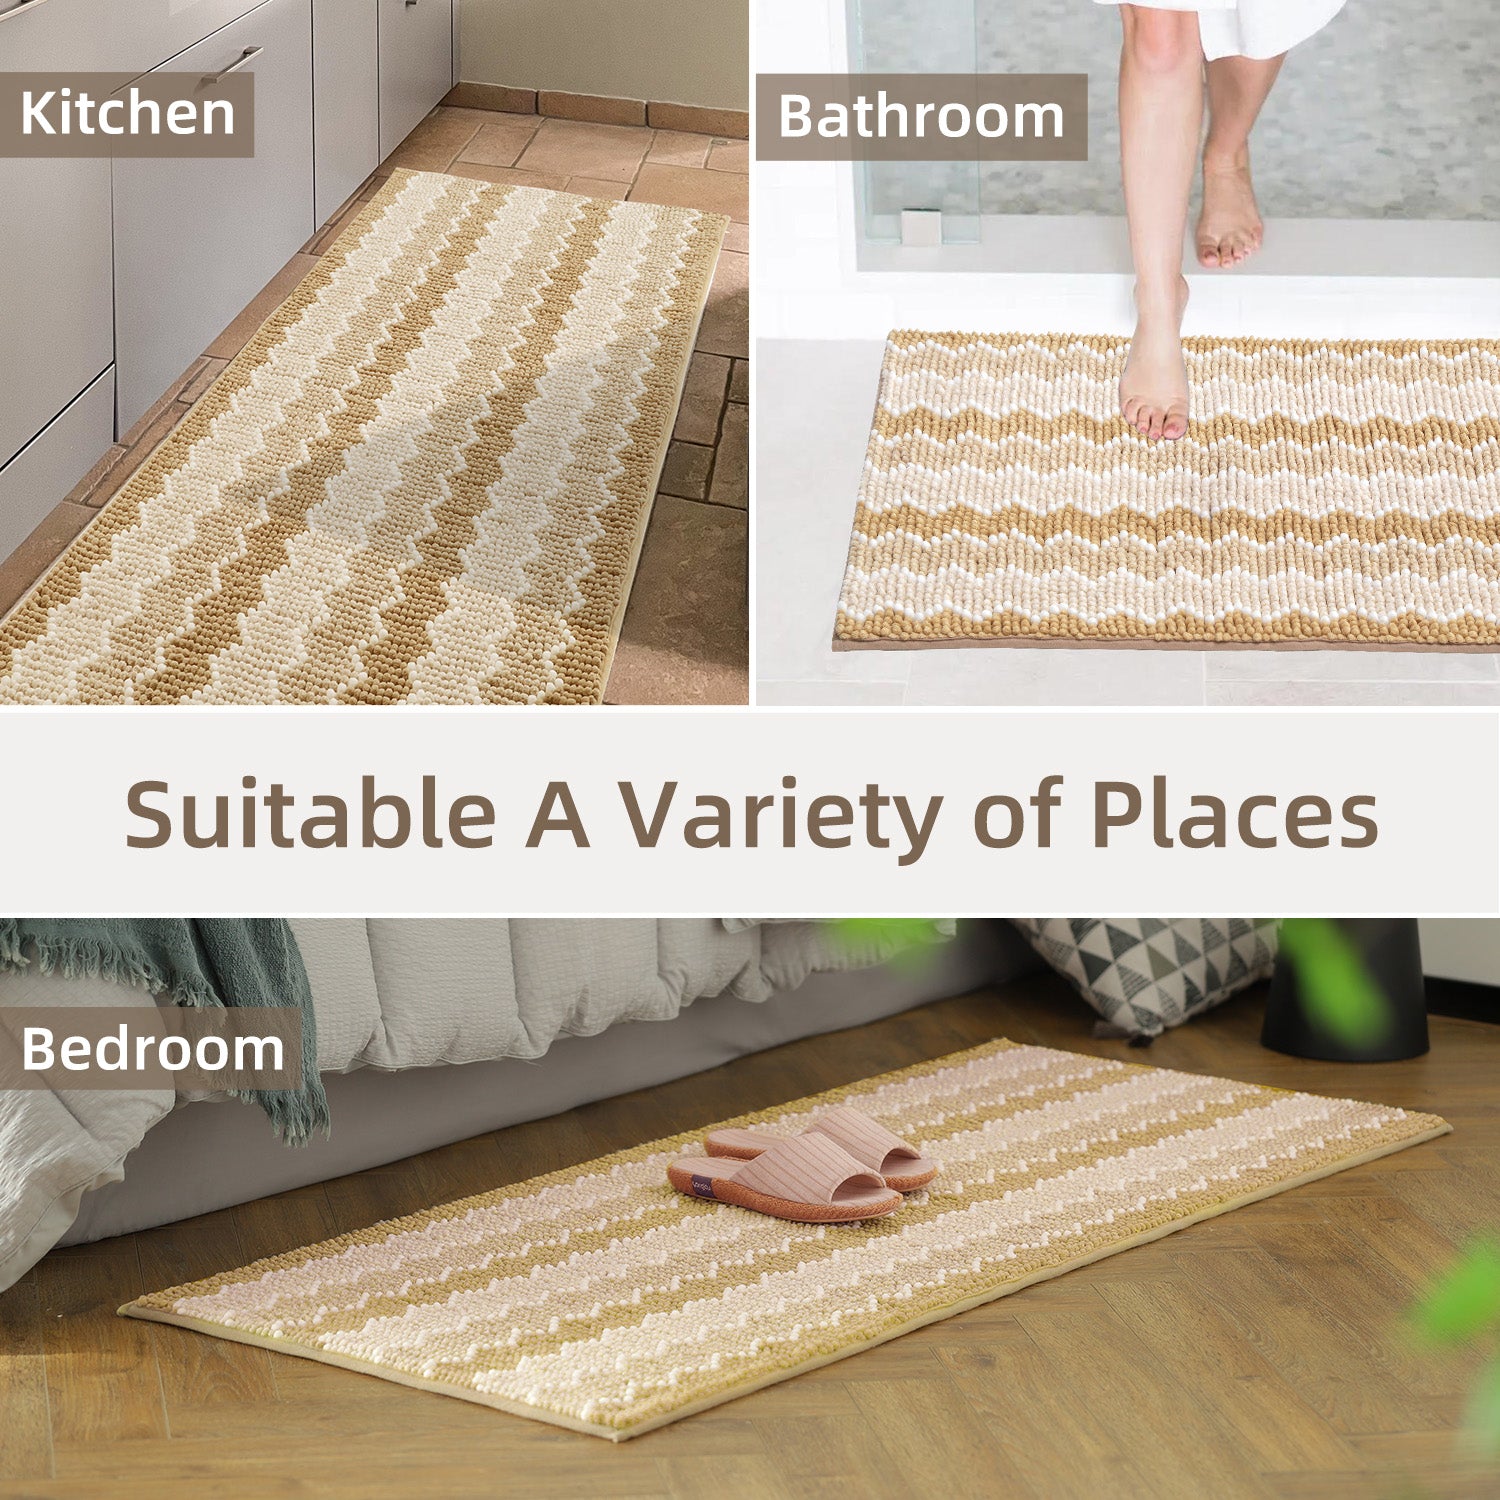 SONORO KATE Bathroom Rug, Non Slip Bath Rugs, Soft Cozy Durable Thick  Chenille Bath Mat, Ultra Water Absorbent and Fast Dry Bath Mats for  Bathtubs